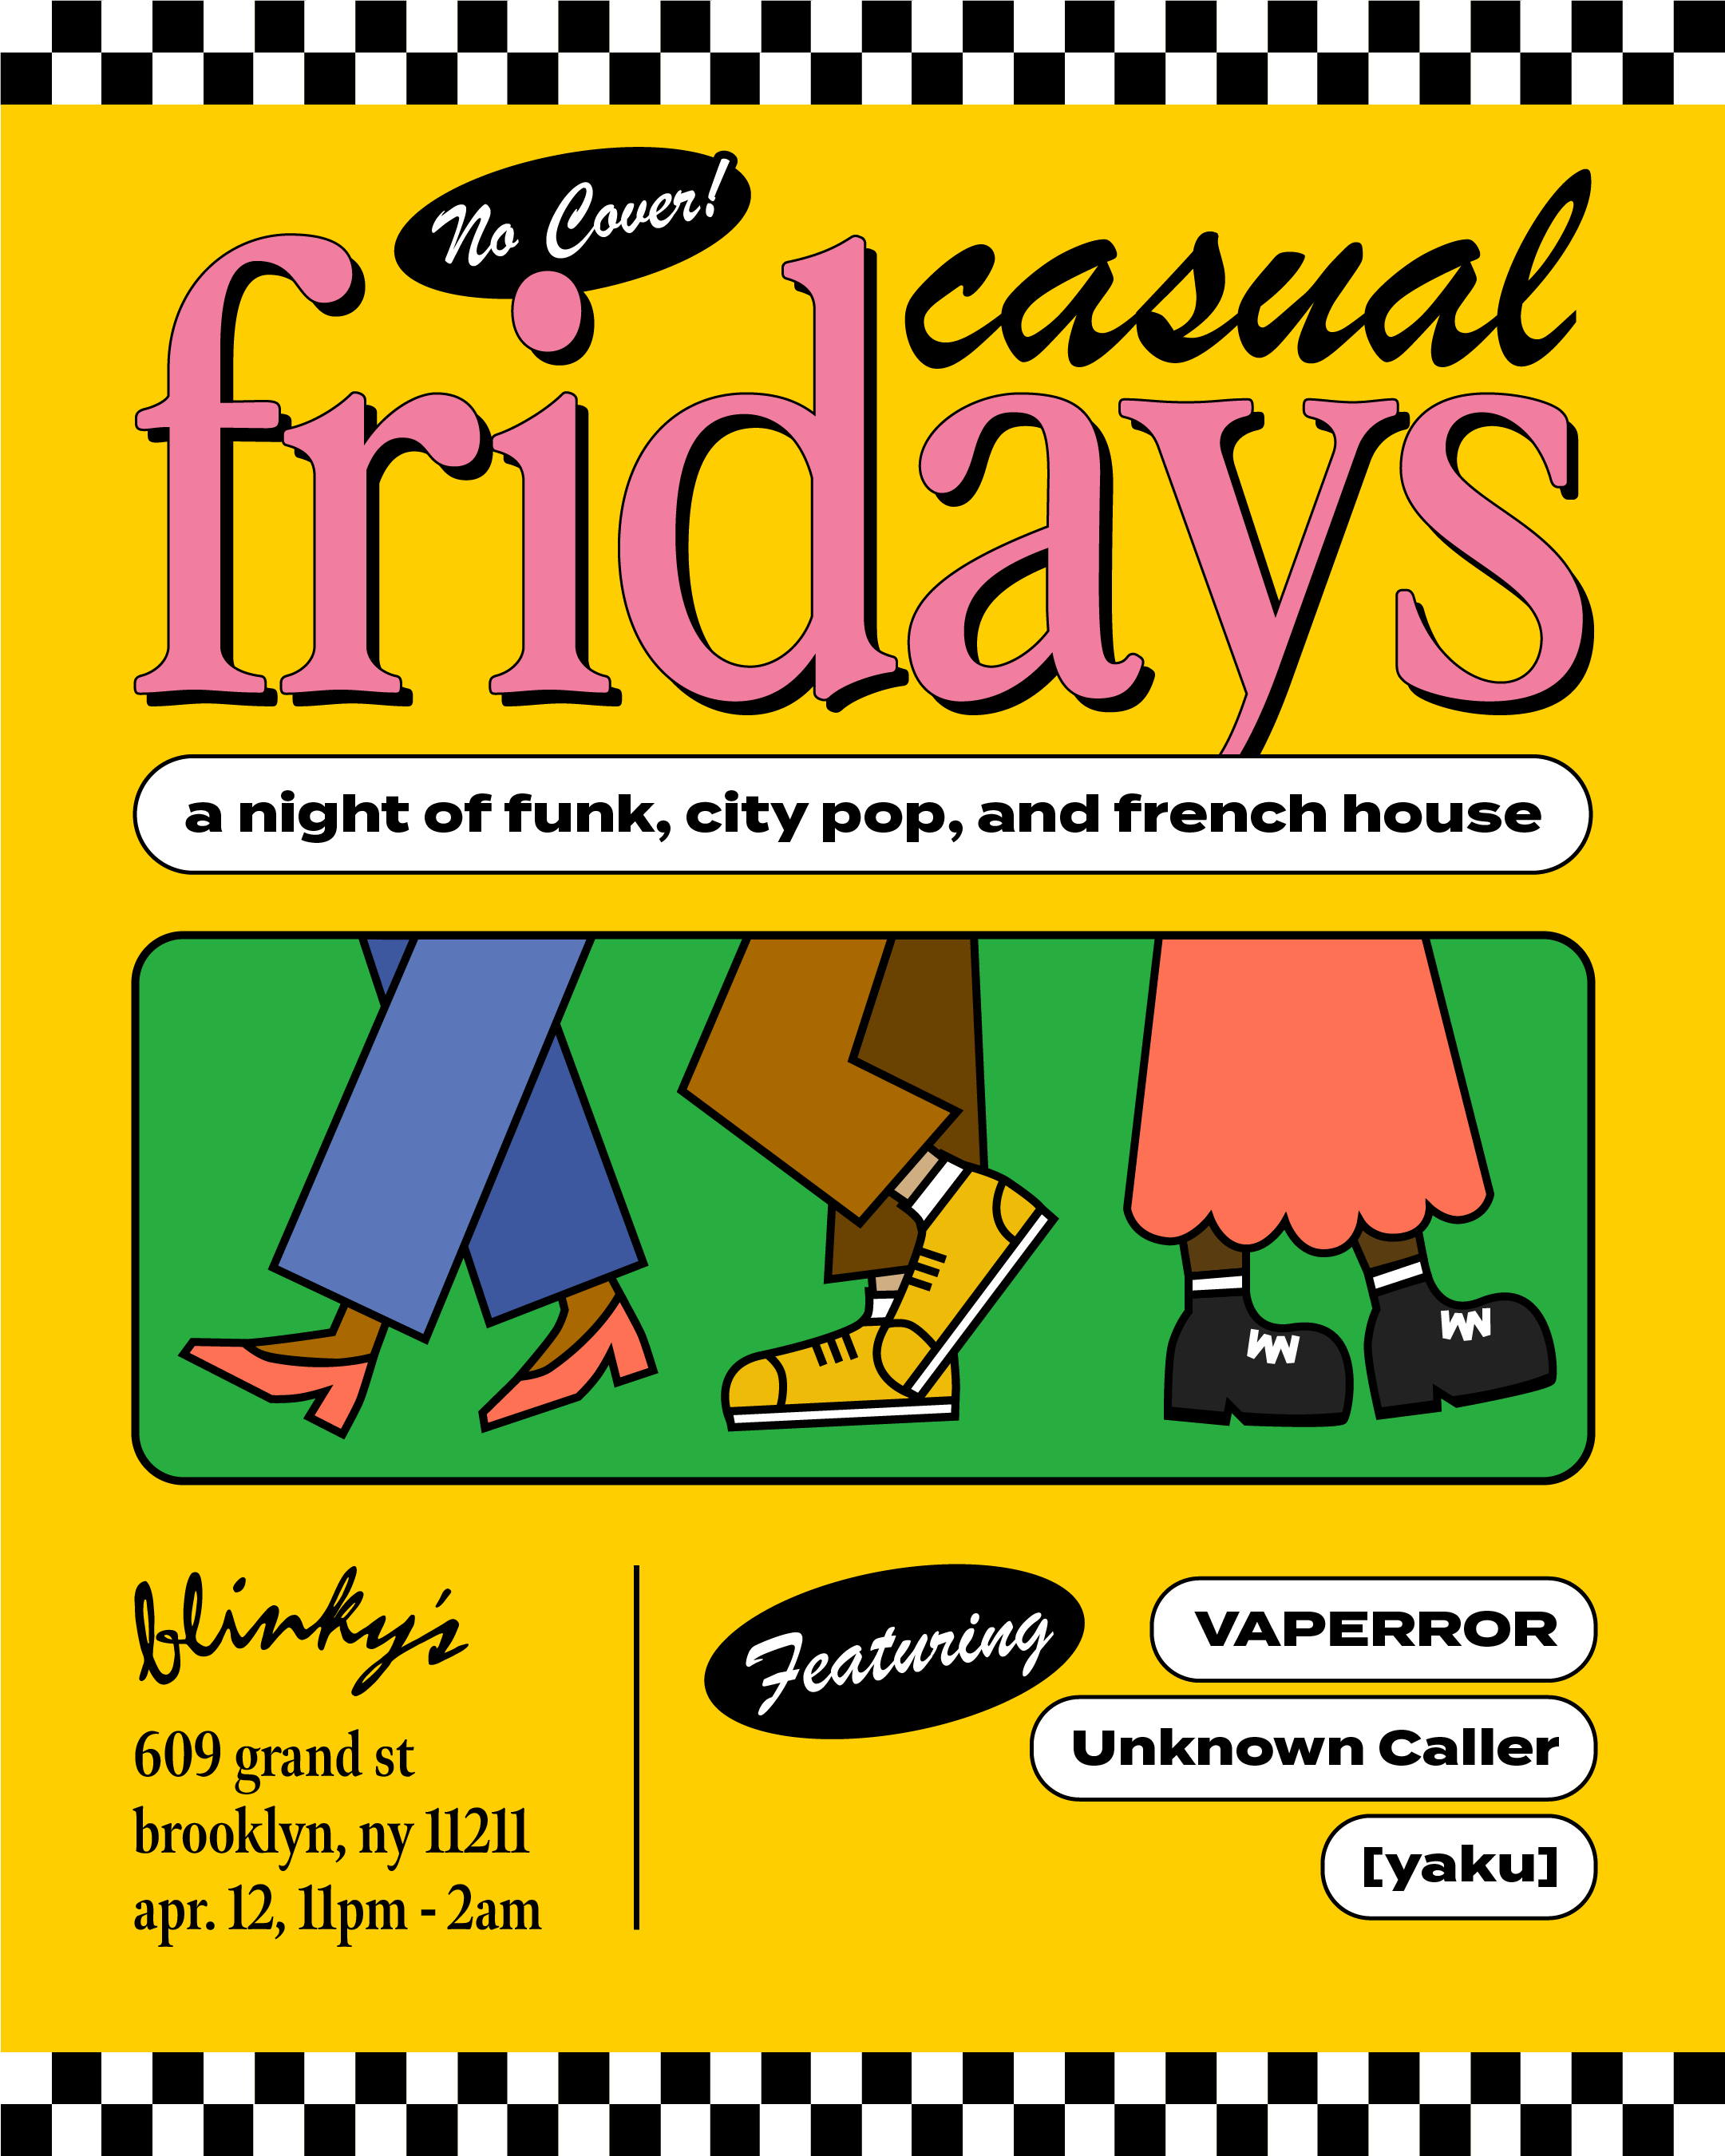 casual fridays: funk, city pop, french house - Página frontal